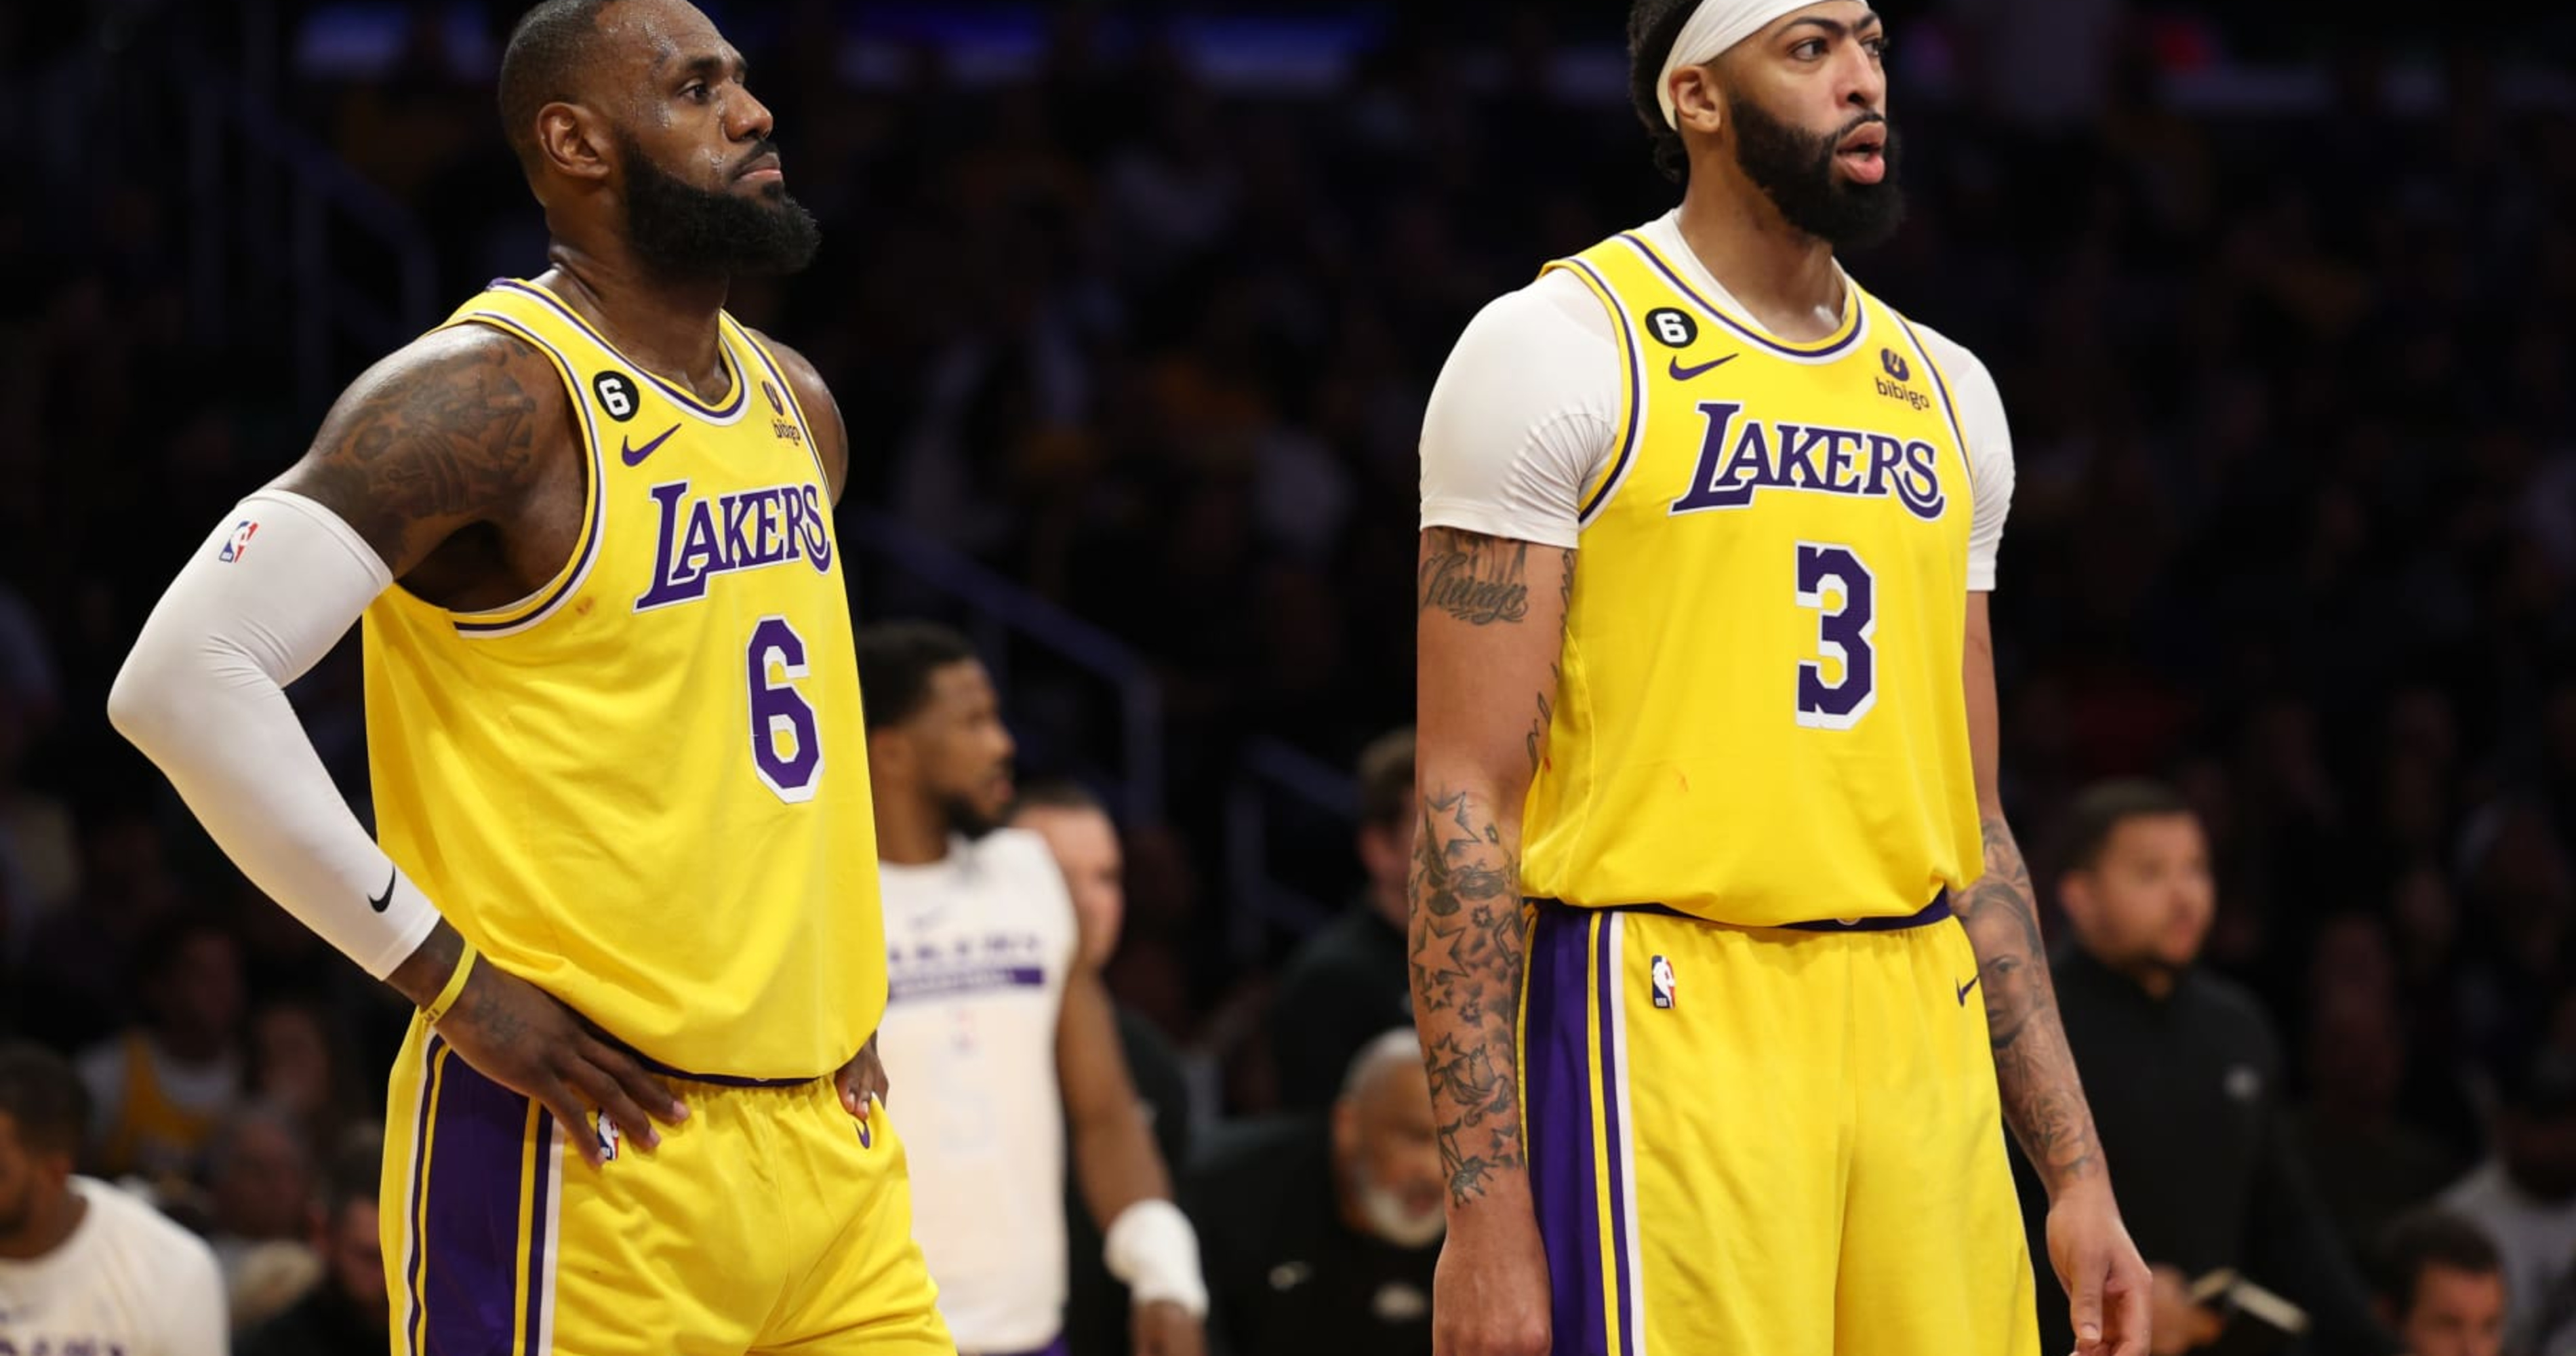 Can the Lakers win it all? We breakdown the new NBA season